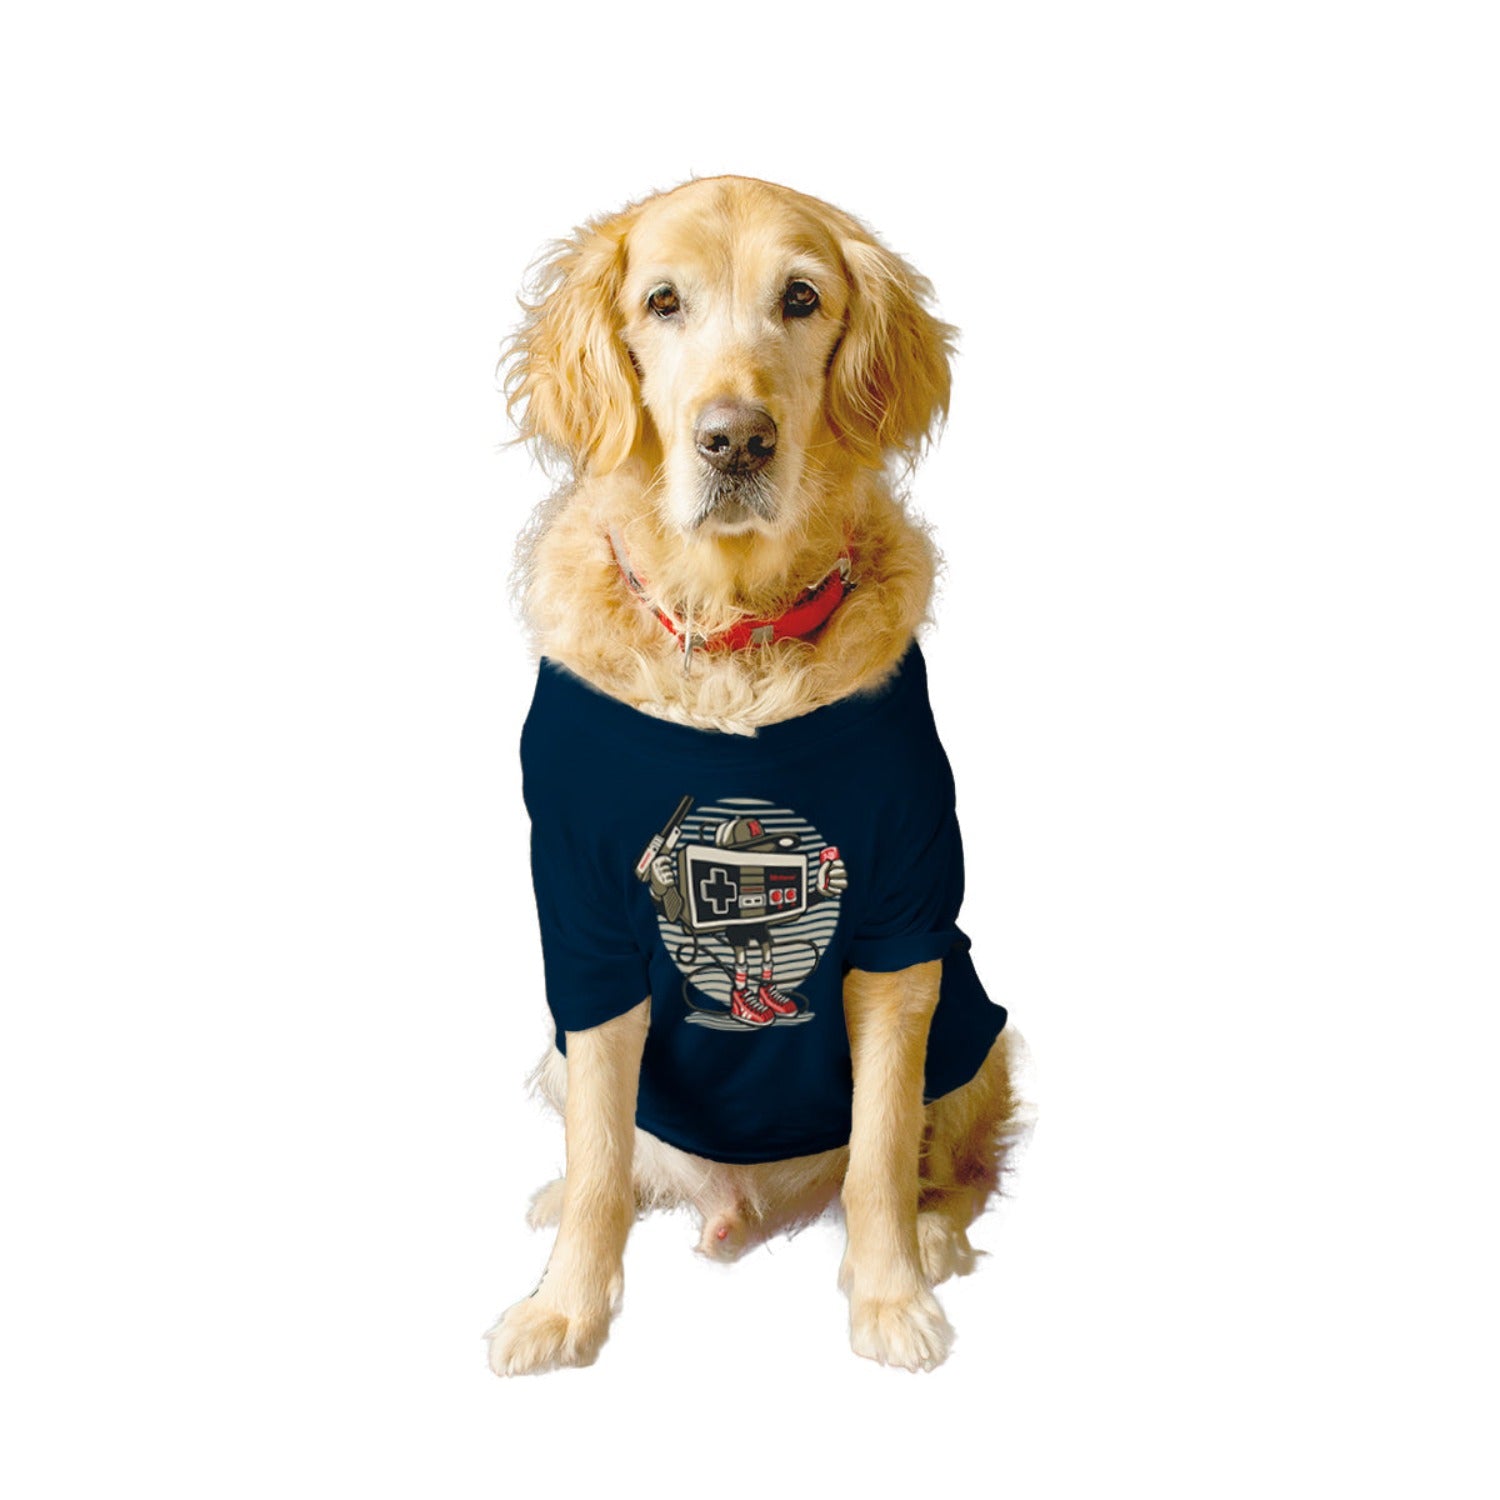 Ruse XX-Small (Chihuahuas, Papillons) / Navy Ruse Basic Crew Neck "Let's Play" Printed Half Sleeves Dog Tee